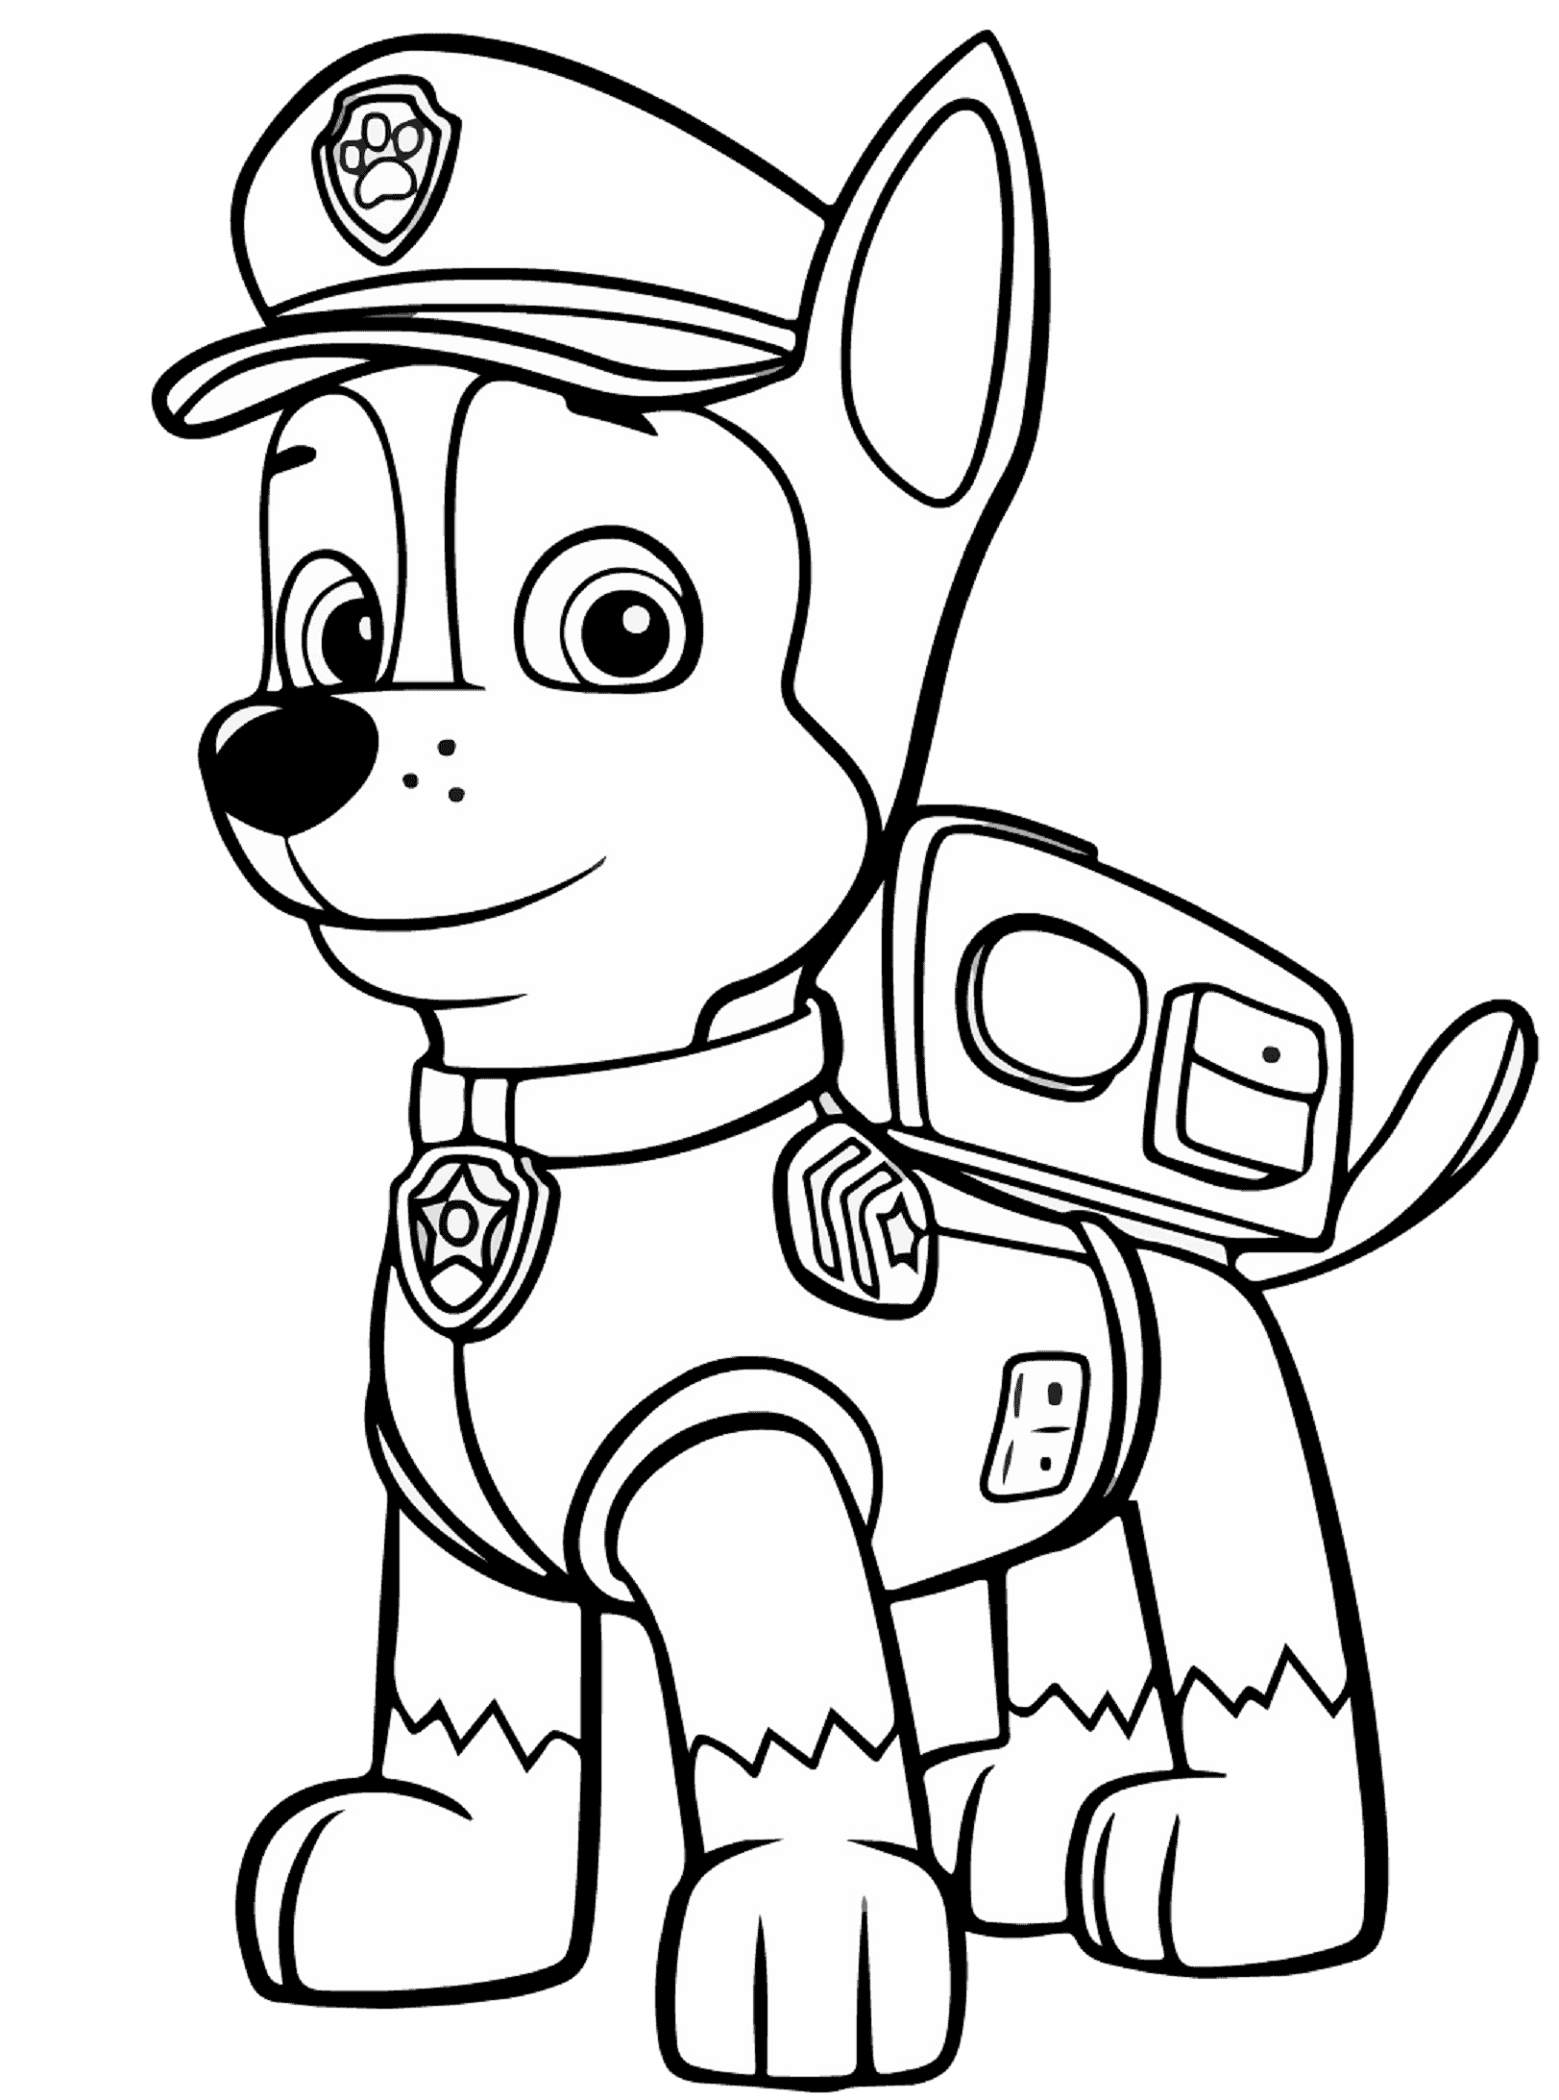 Paw Patrol Coloring Pages FREE Printable 1